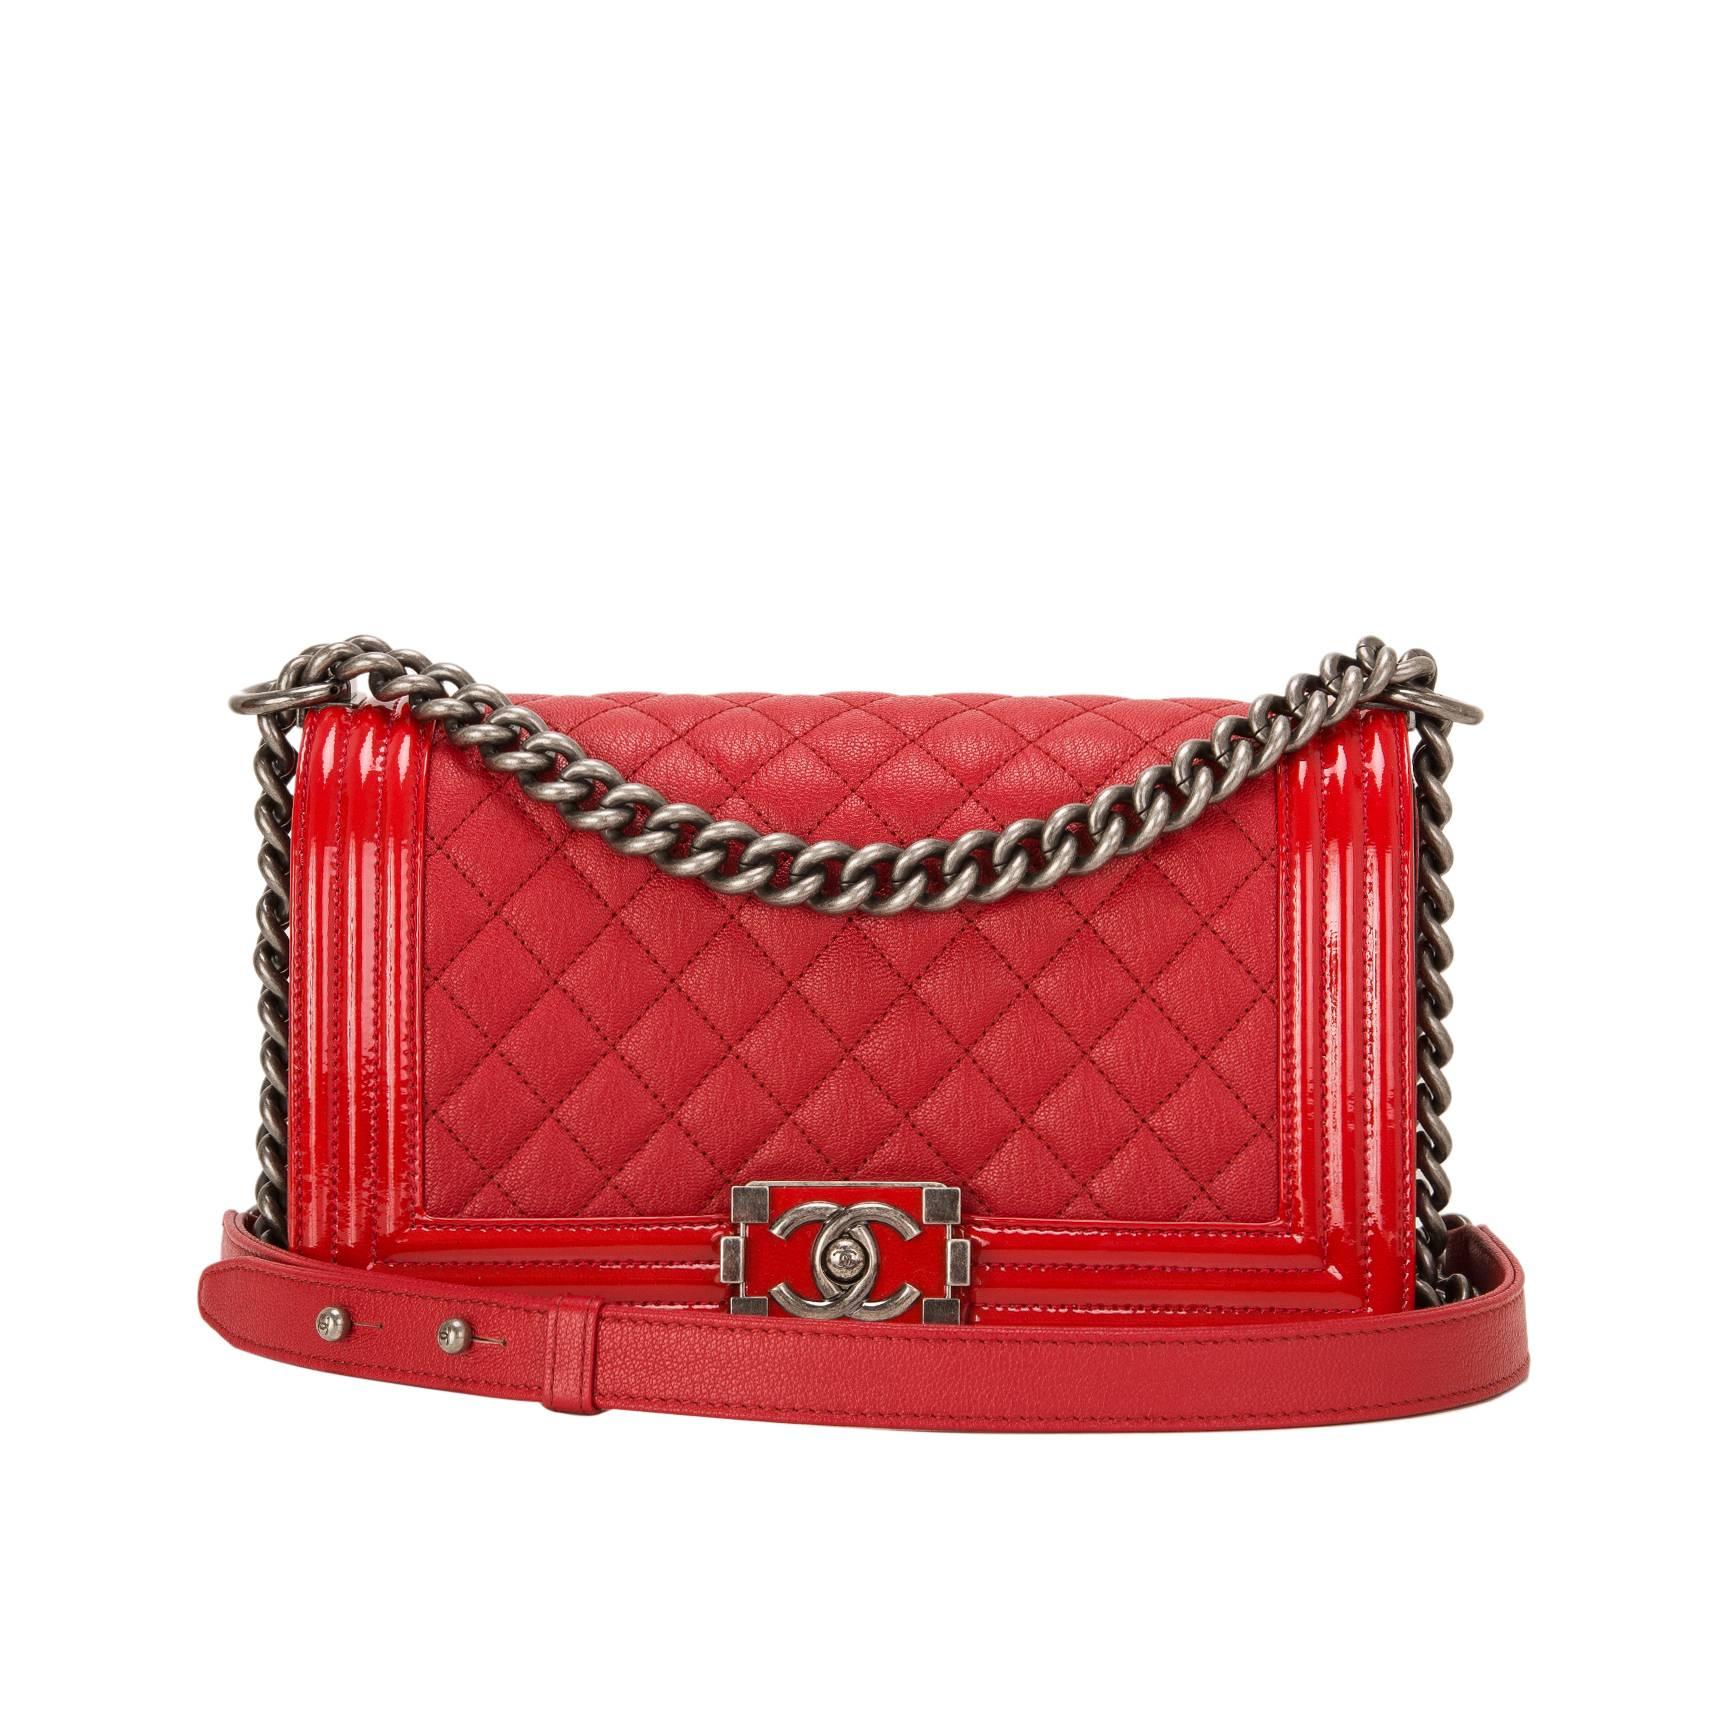 Chanel Red Quilted Goatskin Medium Boy Bag With Patent Trim